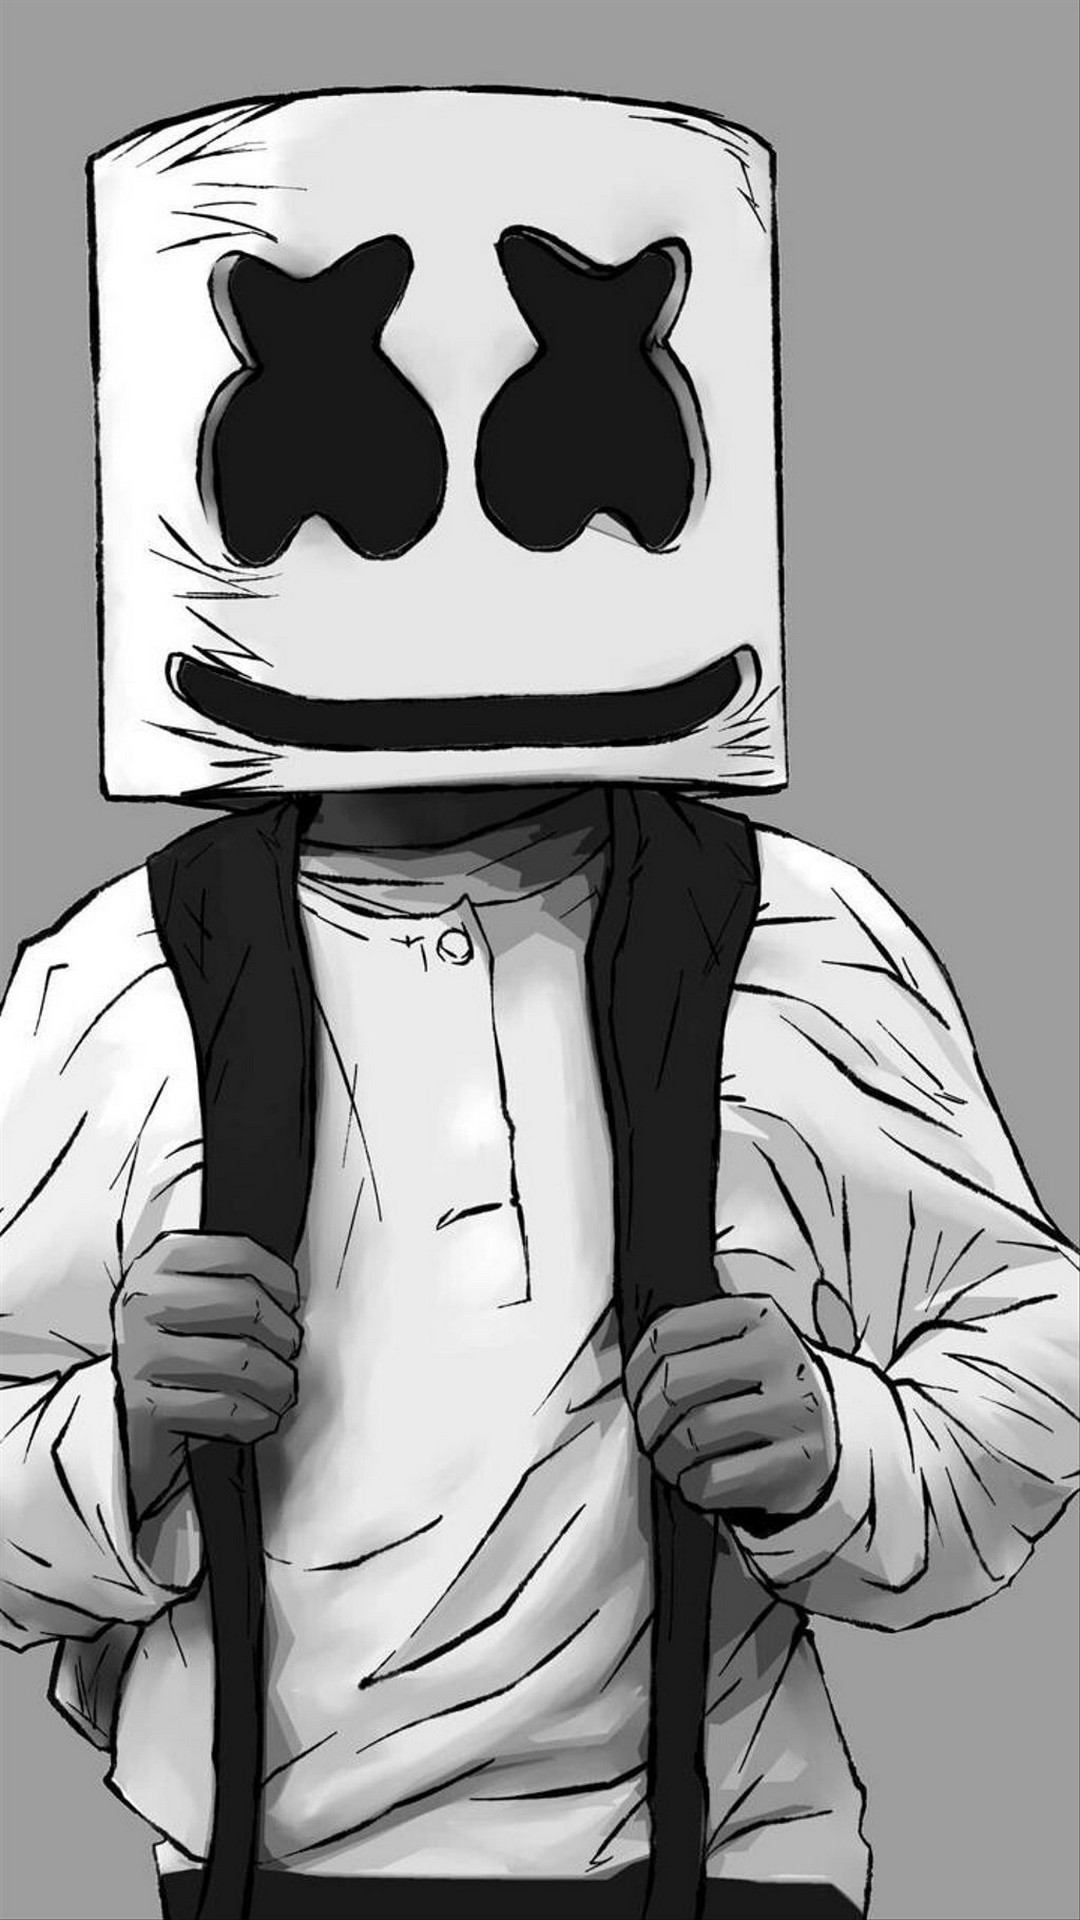 Marshmello iPhone 8 Wallpaper With high-resolution 1080X1920 pixel. You can use this wallpaper for your iPhone 5, 6, 7, 8, X, XS, XR backgrounds, Mobile Screensaver, or iPad Lock Screen